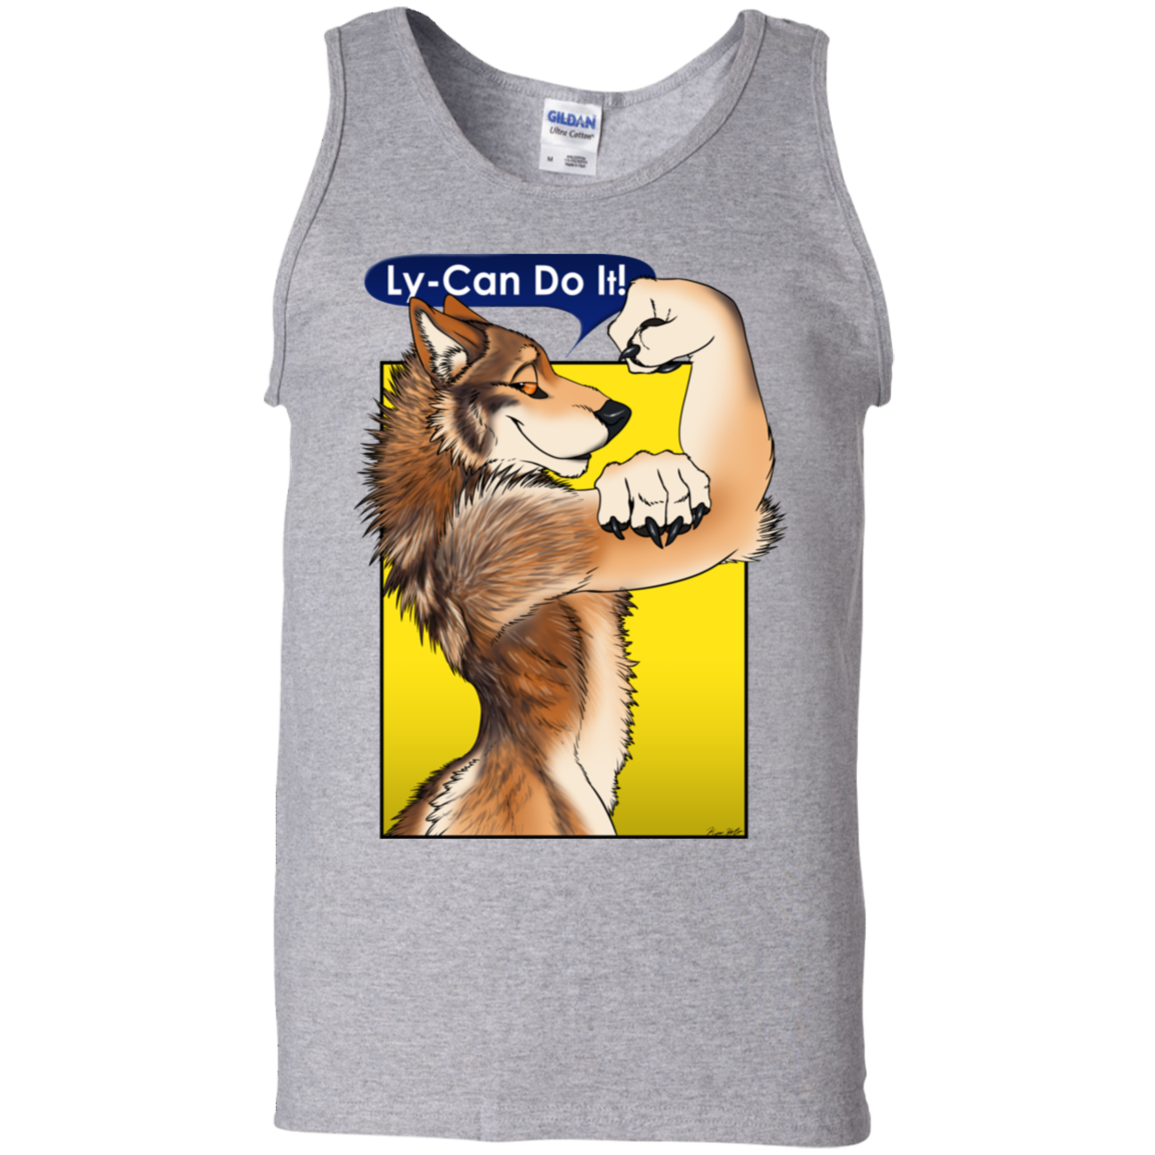 Ly-Can Do it! Tank Top